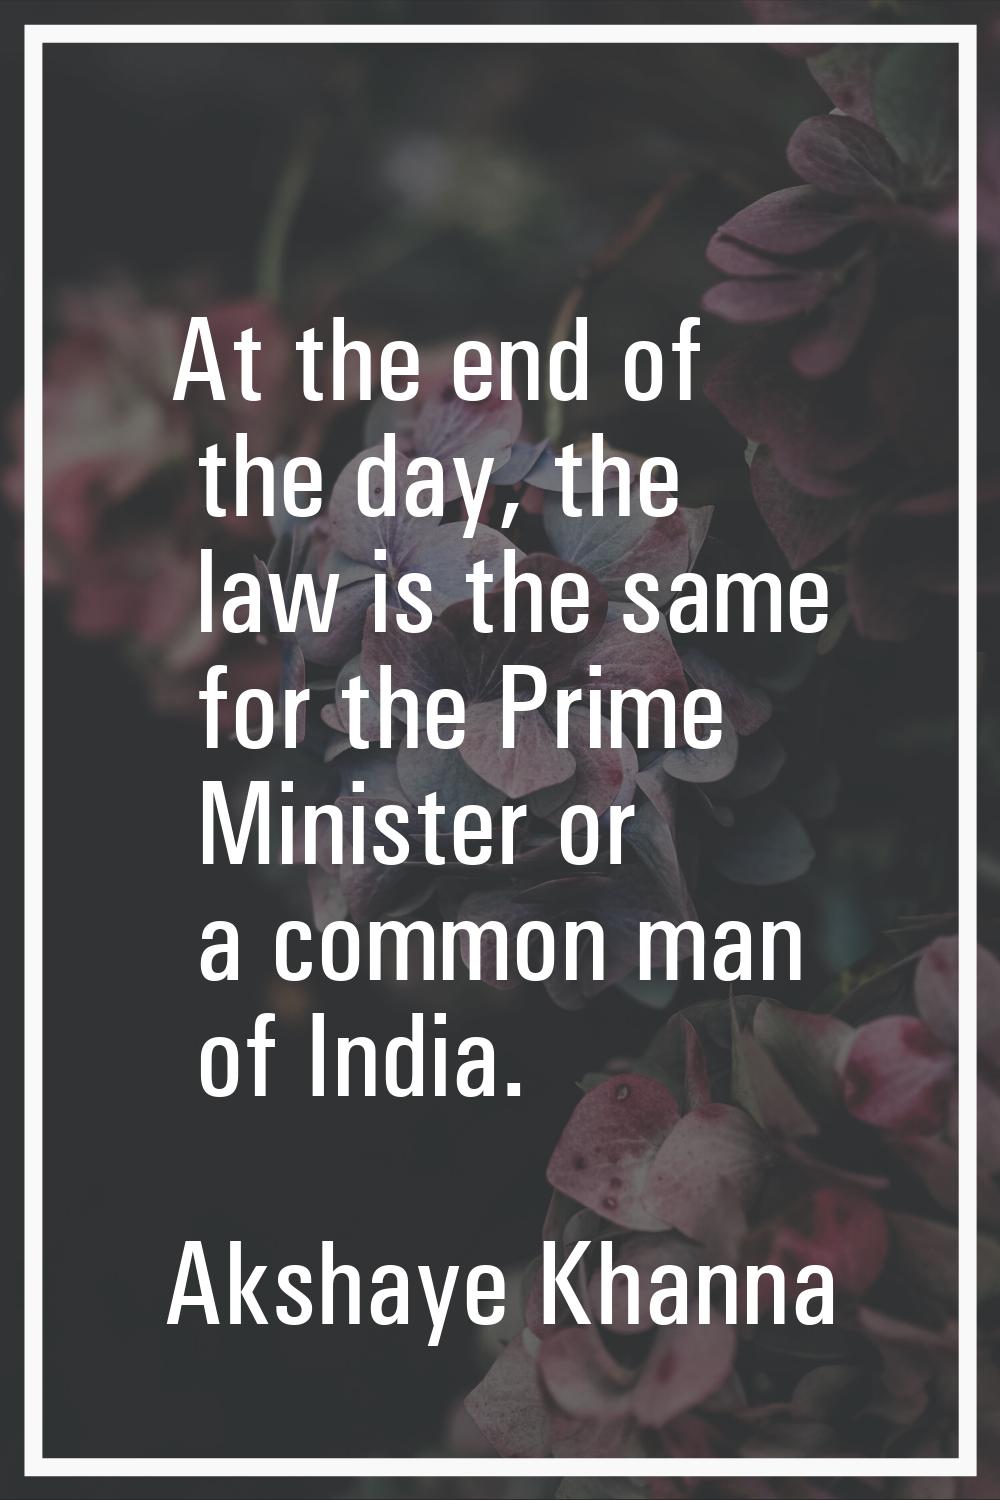 At the end of the day, the law is the same for the Prime Minister or a common man of India.